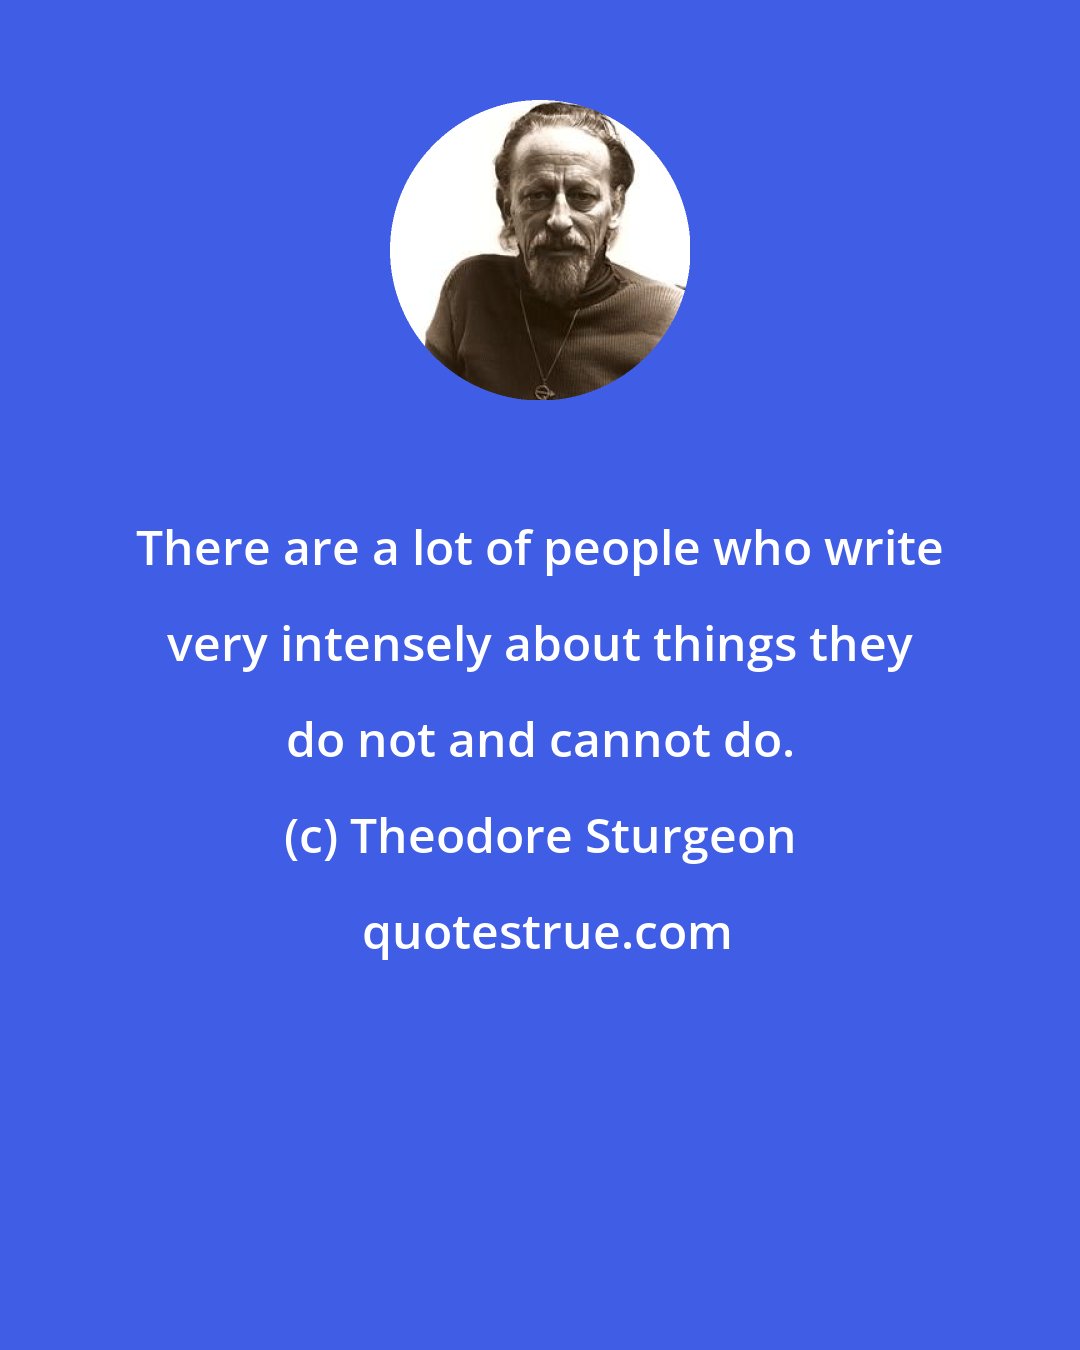 Theodore Sturgeon: There are a lot of people who write very intensely about things they do not and cannot do.